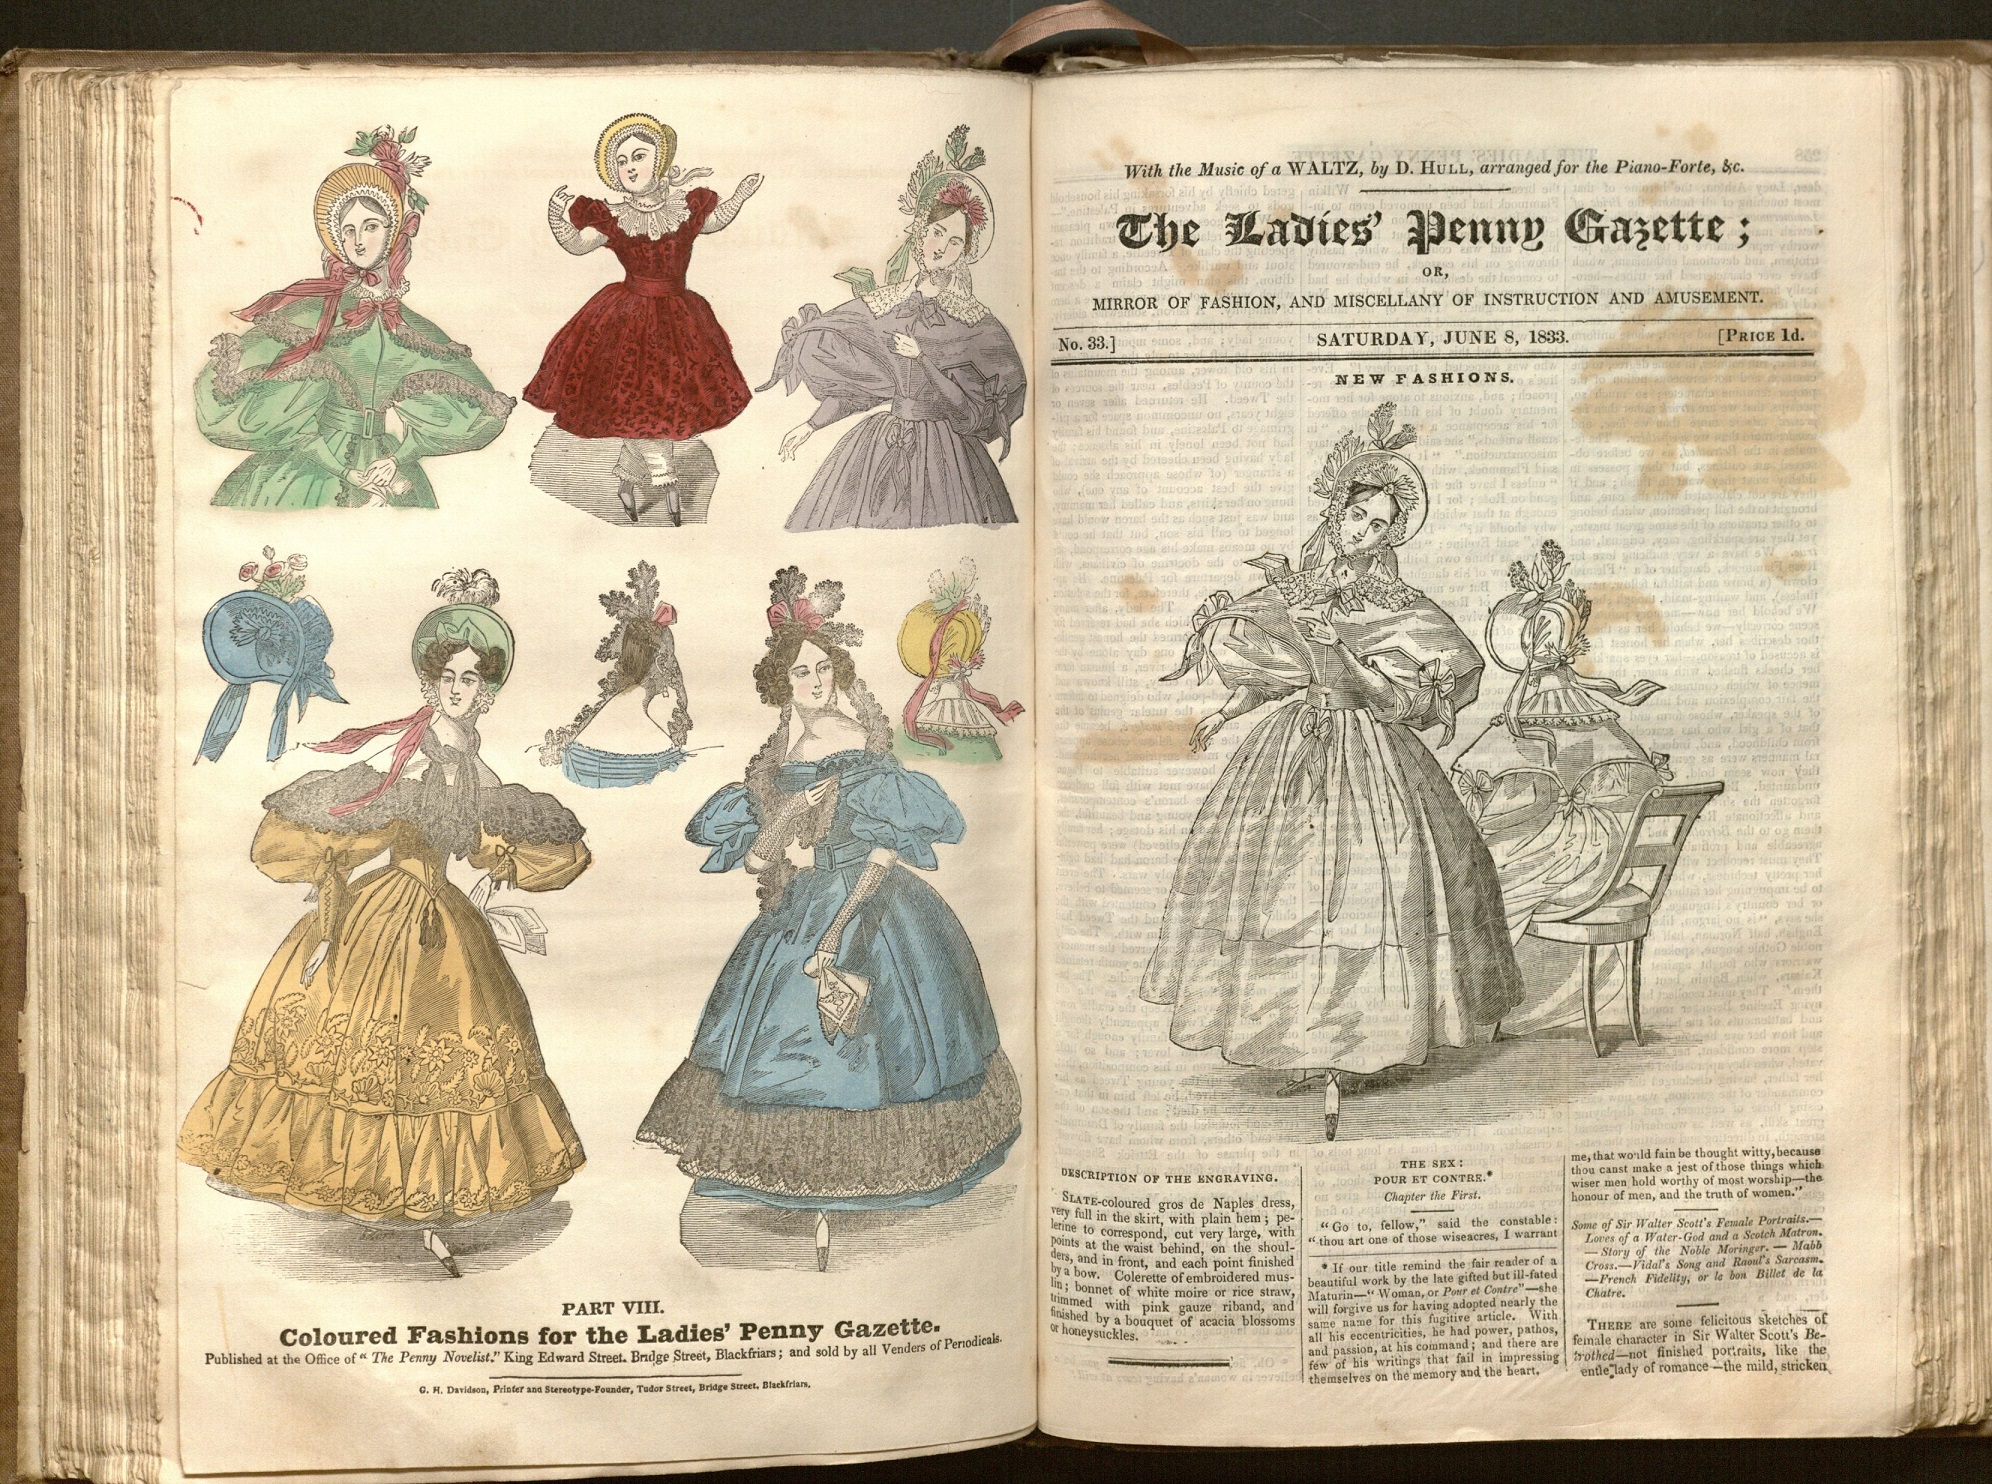 Image of coloured fashion sheet and first page of The Ladies’ Penny Gazette (June 8, 1833)